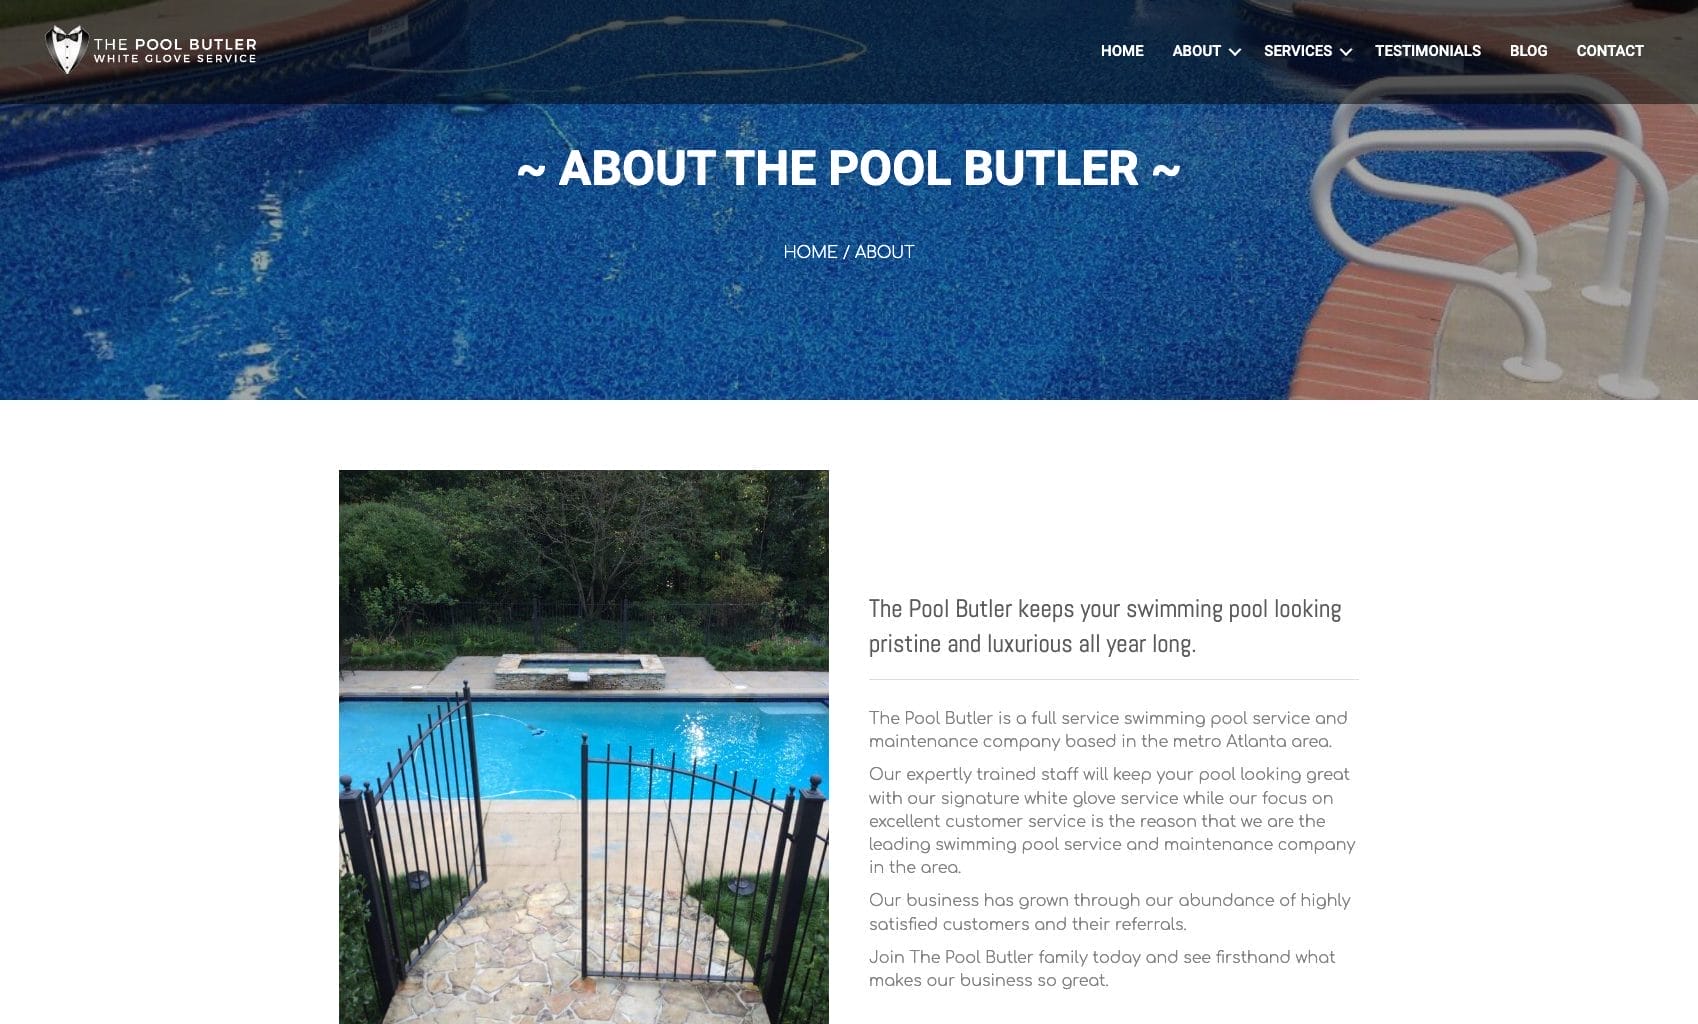 The old website from The Pool Butler